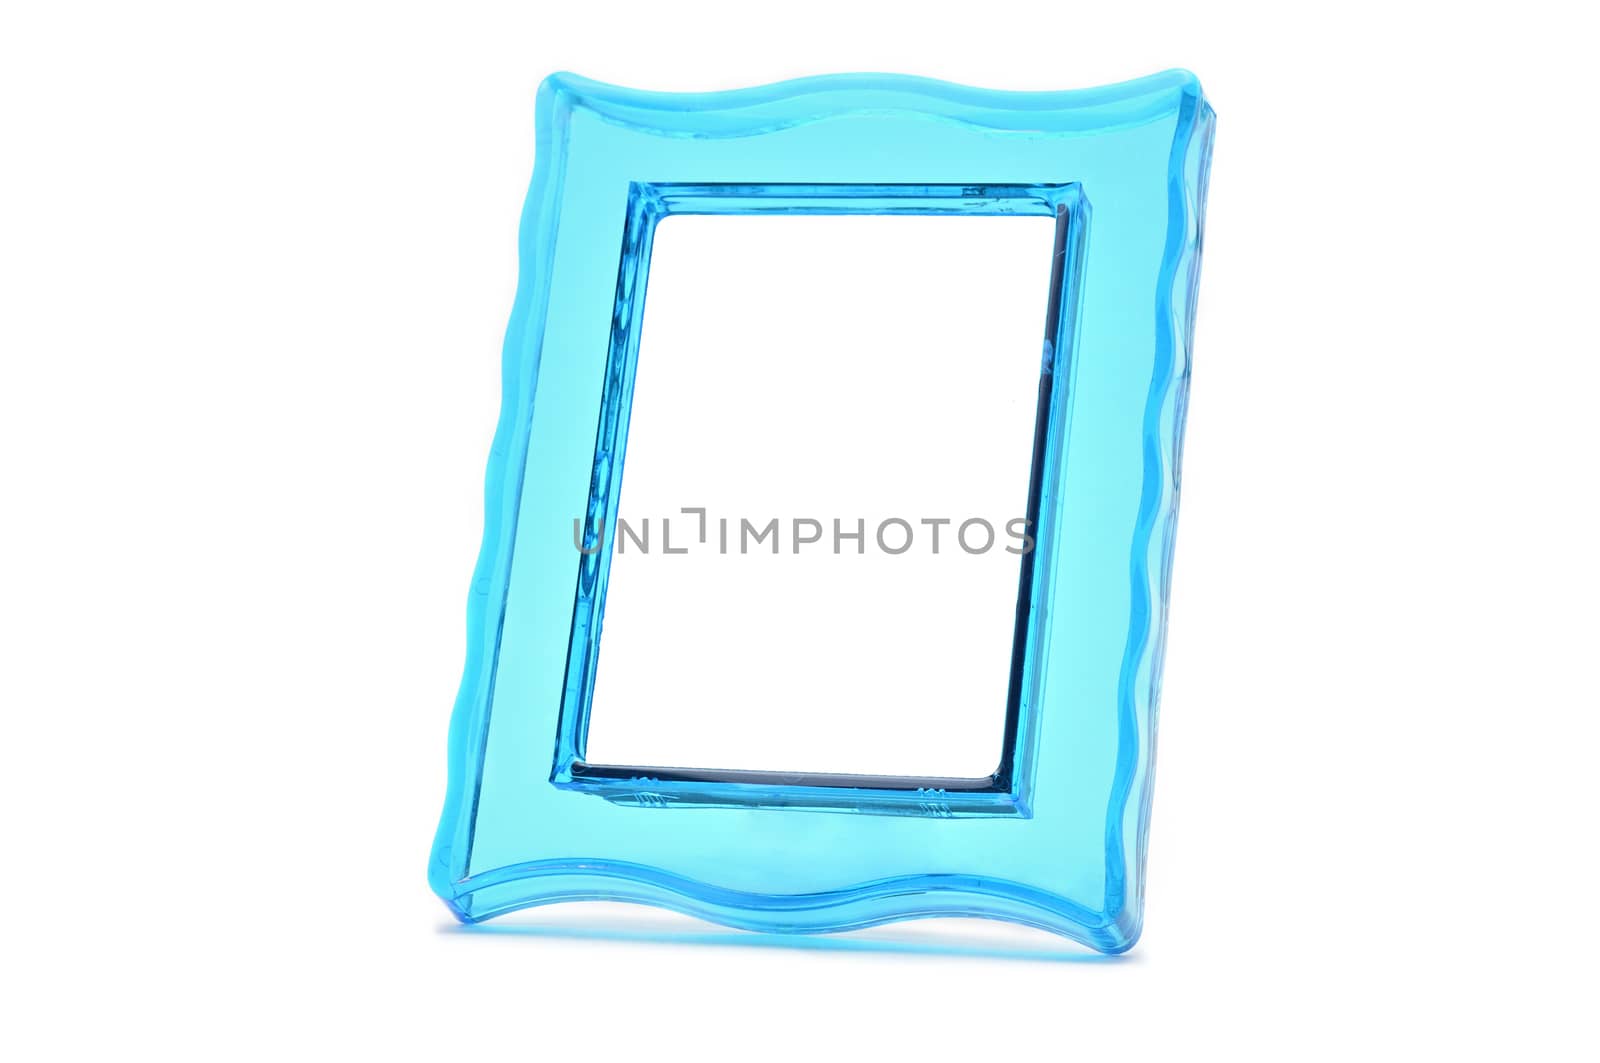 Vintage transparent plastic turquoise color photo frame on an isolated white background.